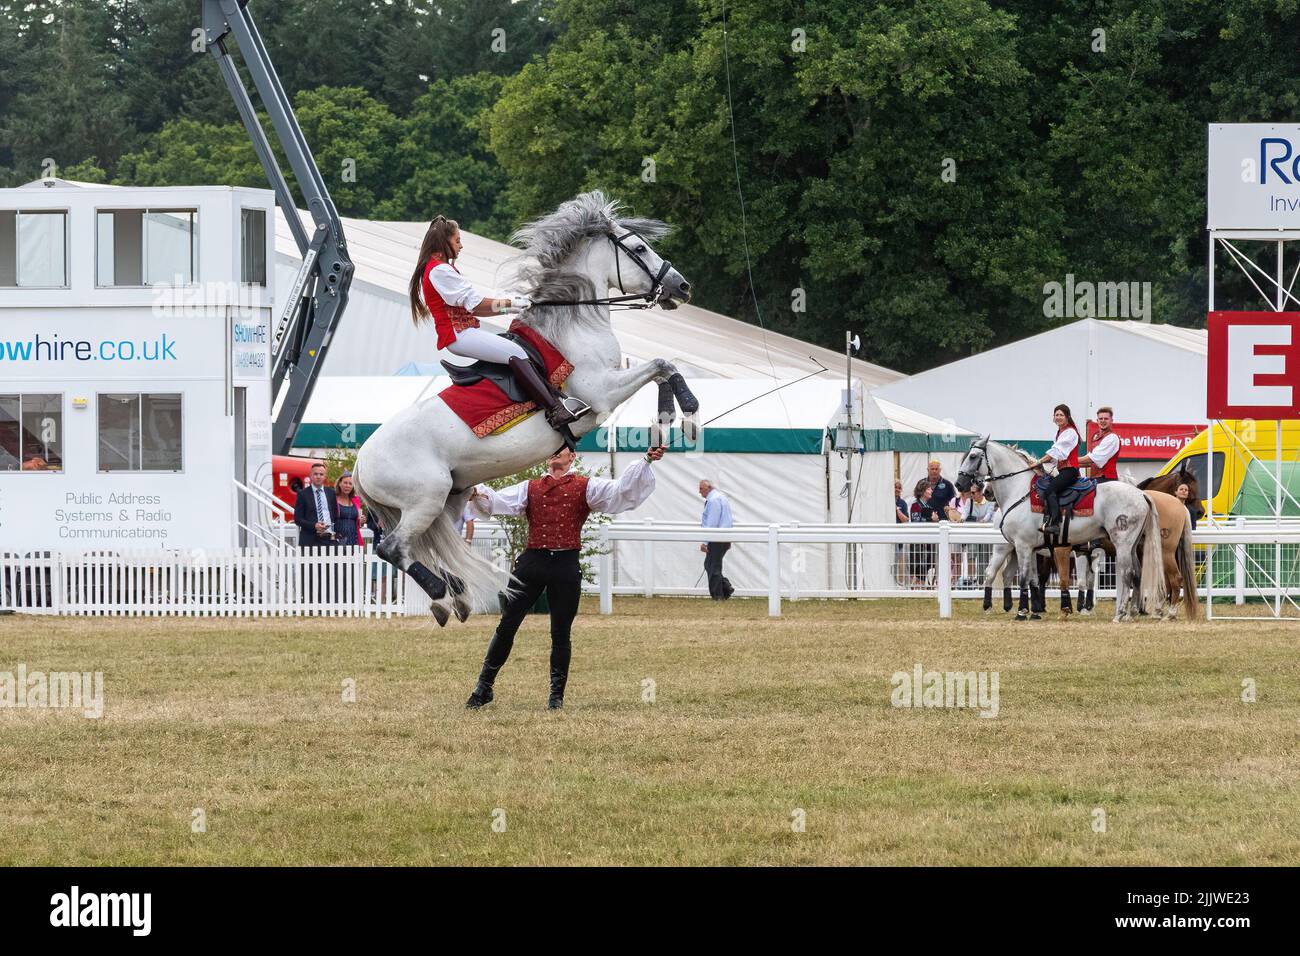 Atkinson Action Horses at the New Forest and Hampshire County Show in July 2022, England, UK, performing airs above the ground classical dressage Stock Photo